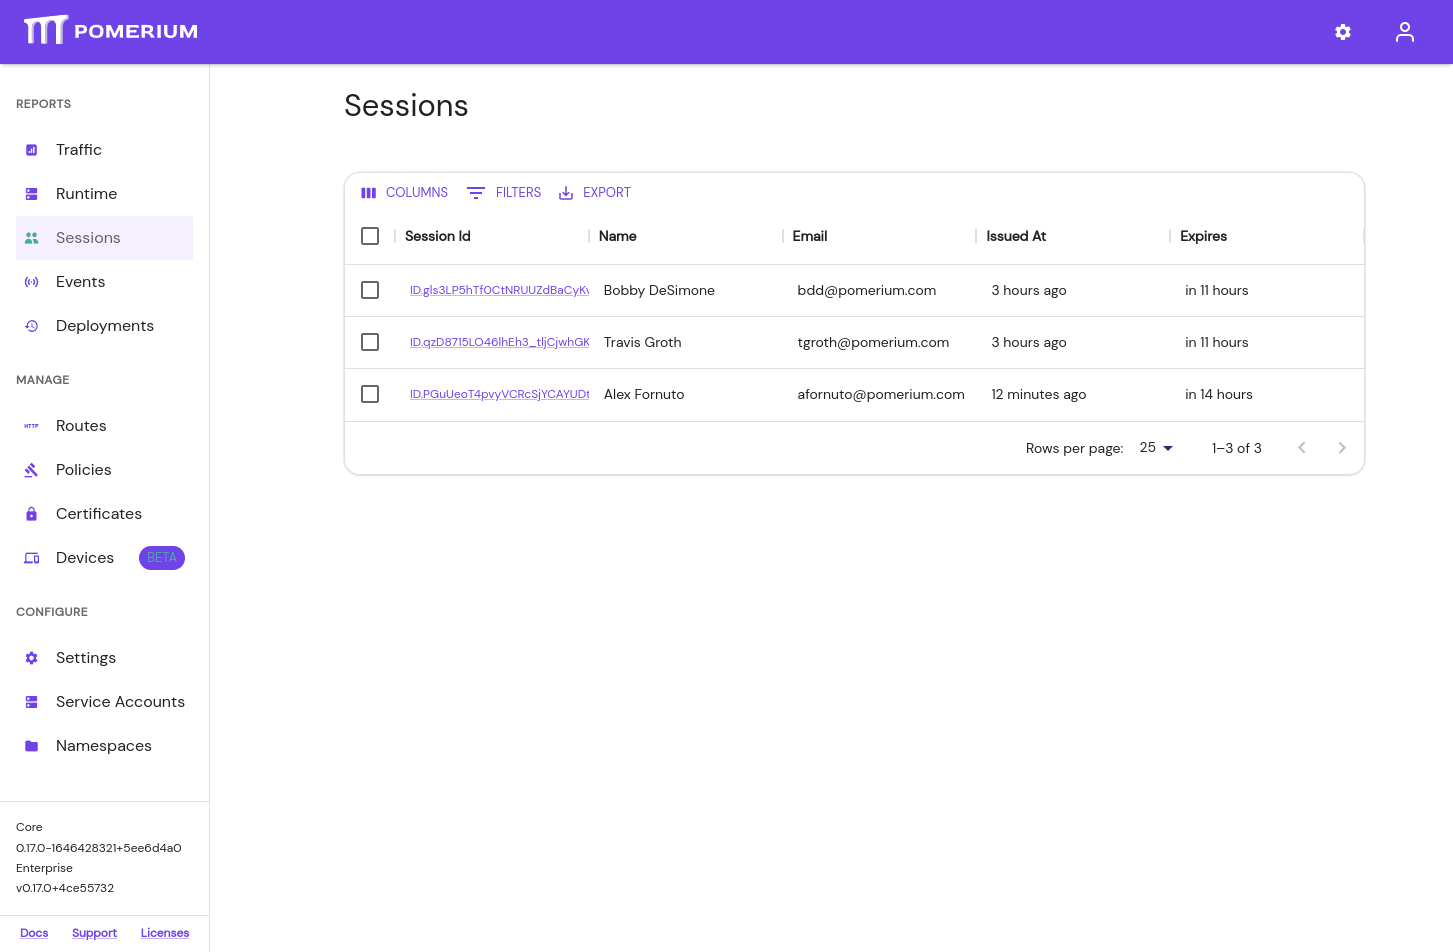 The Sessions page in Pomerium Enterprise